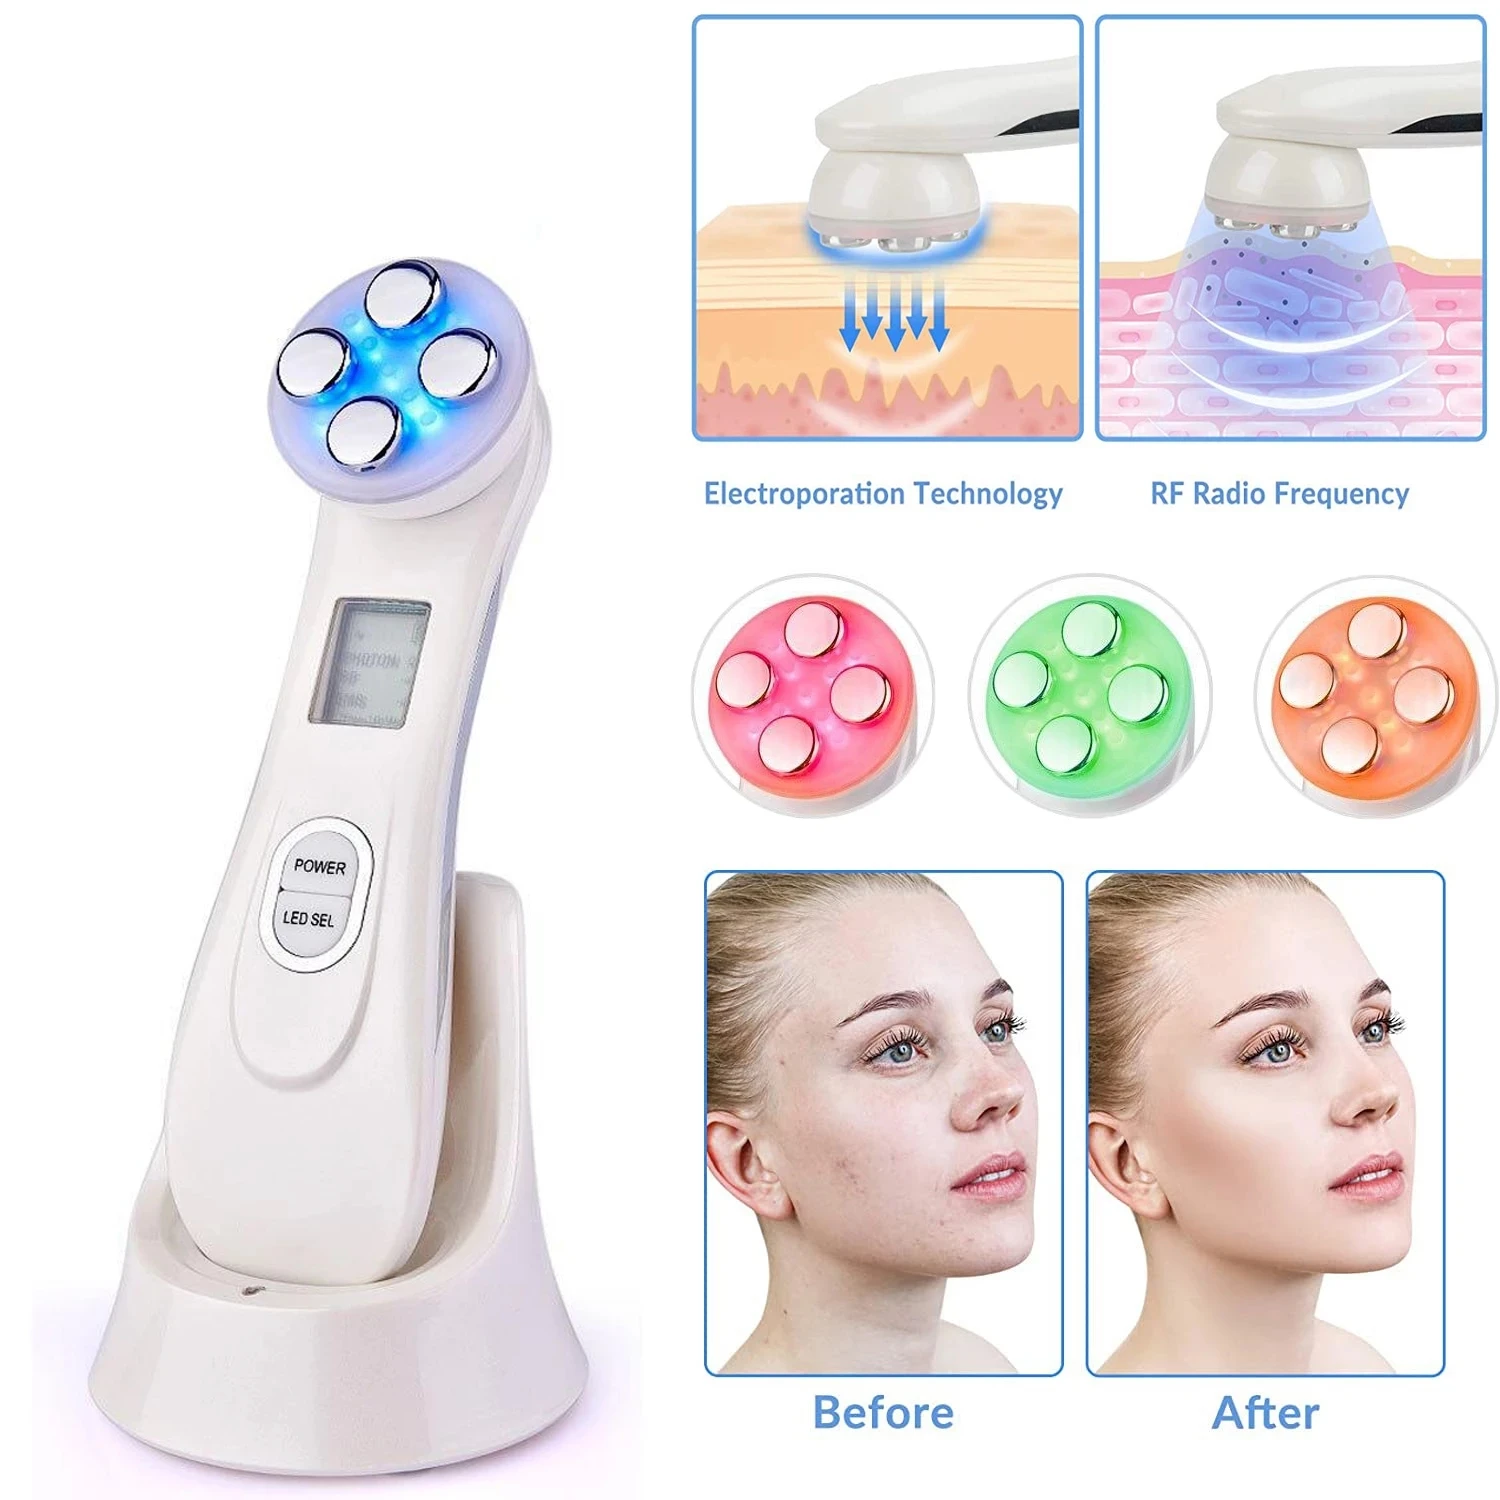 Facial EMS Mesotherapy Electroporation RF Radio Frequency LED Photon Face Lifting Tighten Wrinkle Removal Skin Care Massager